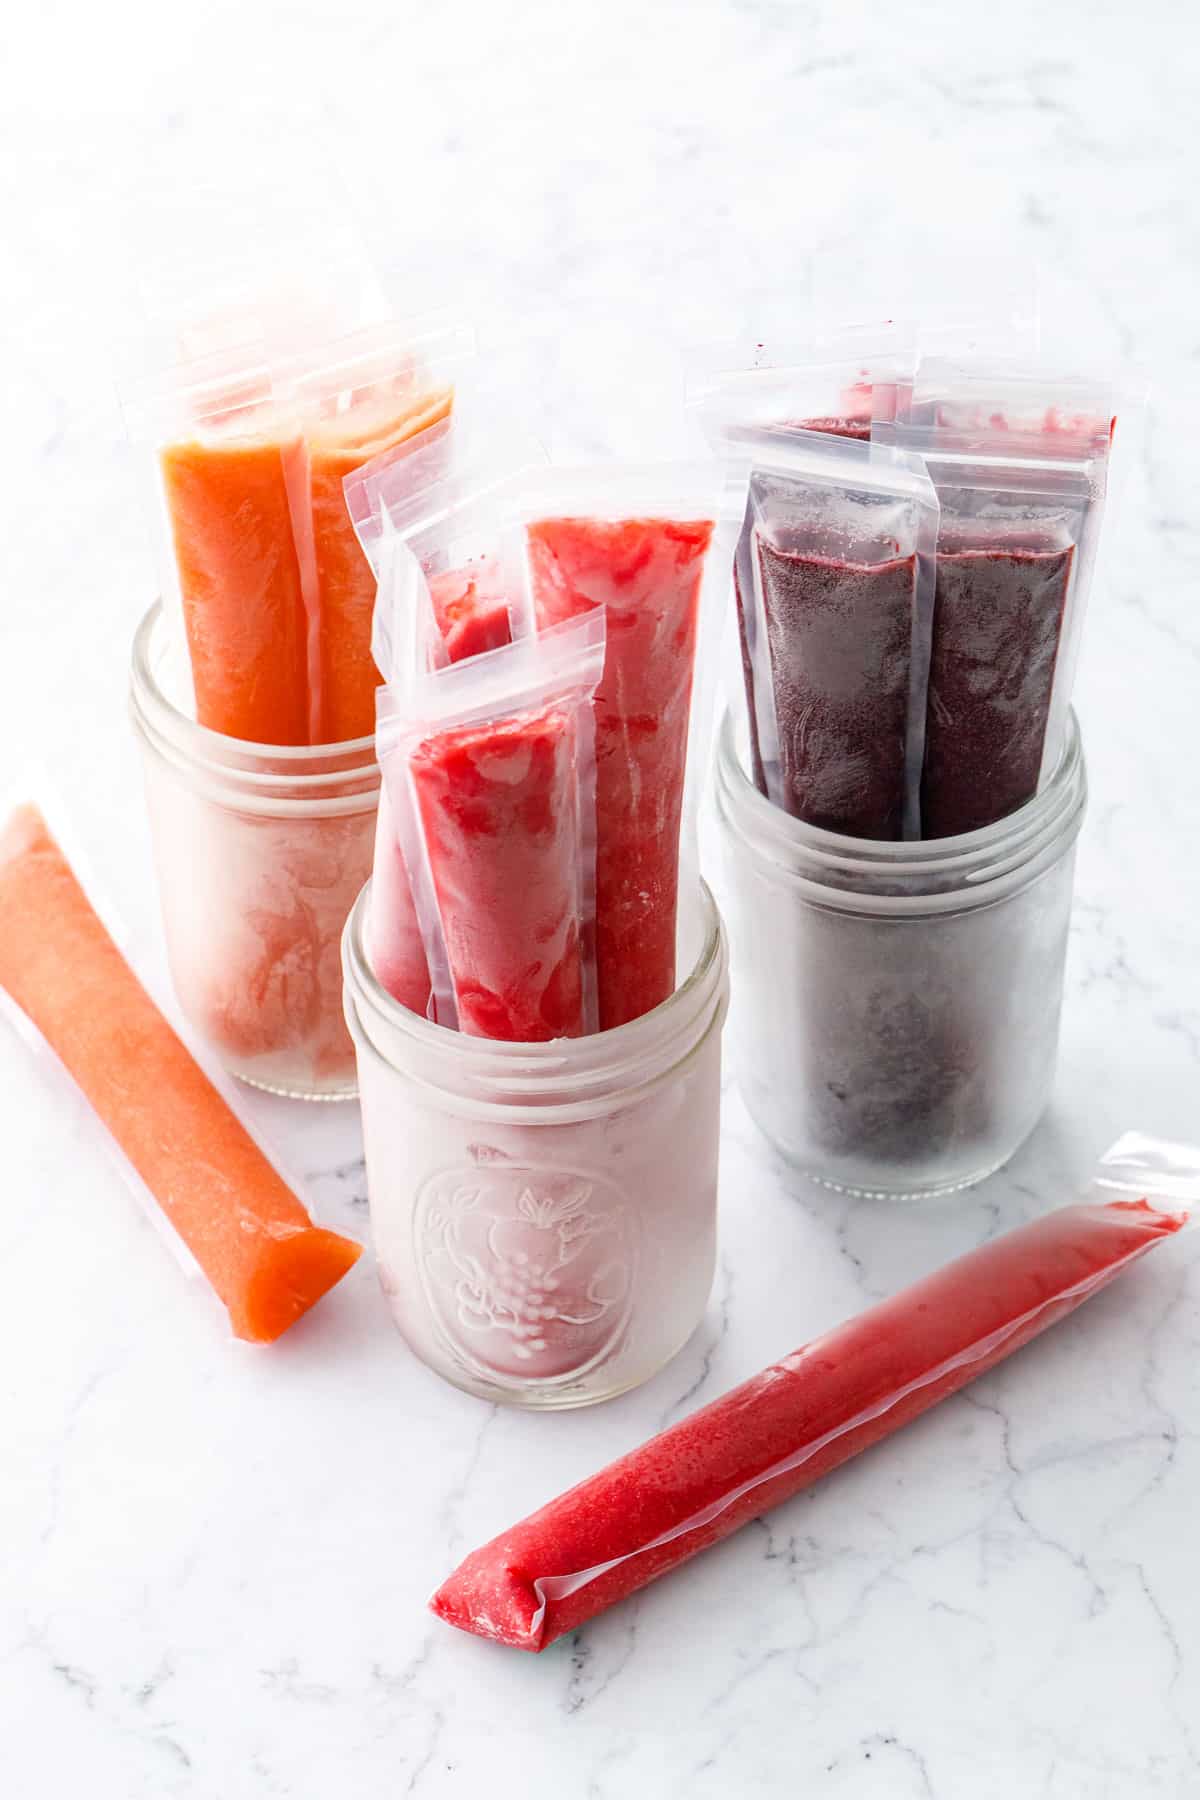 Three jars with different flavors of Freezer Jam Ice Pops: Peach, Strawberry, and Blueberry